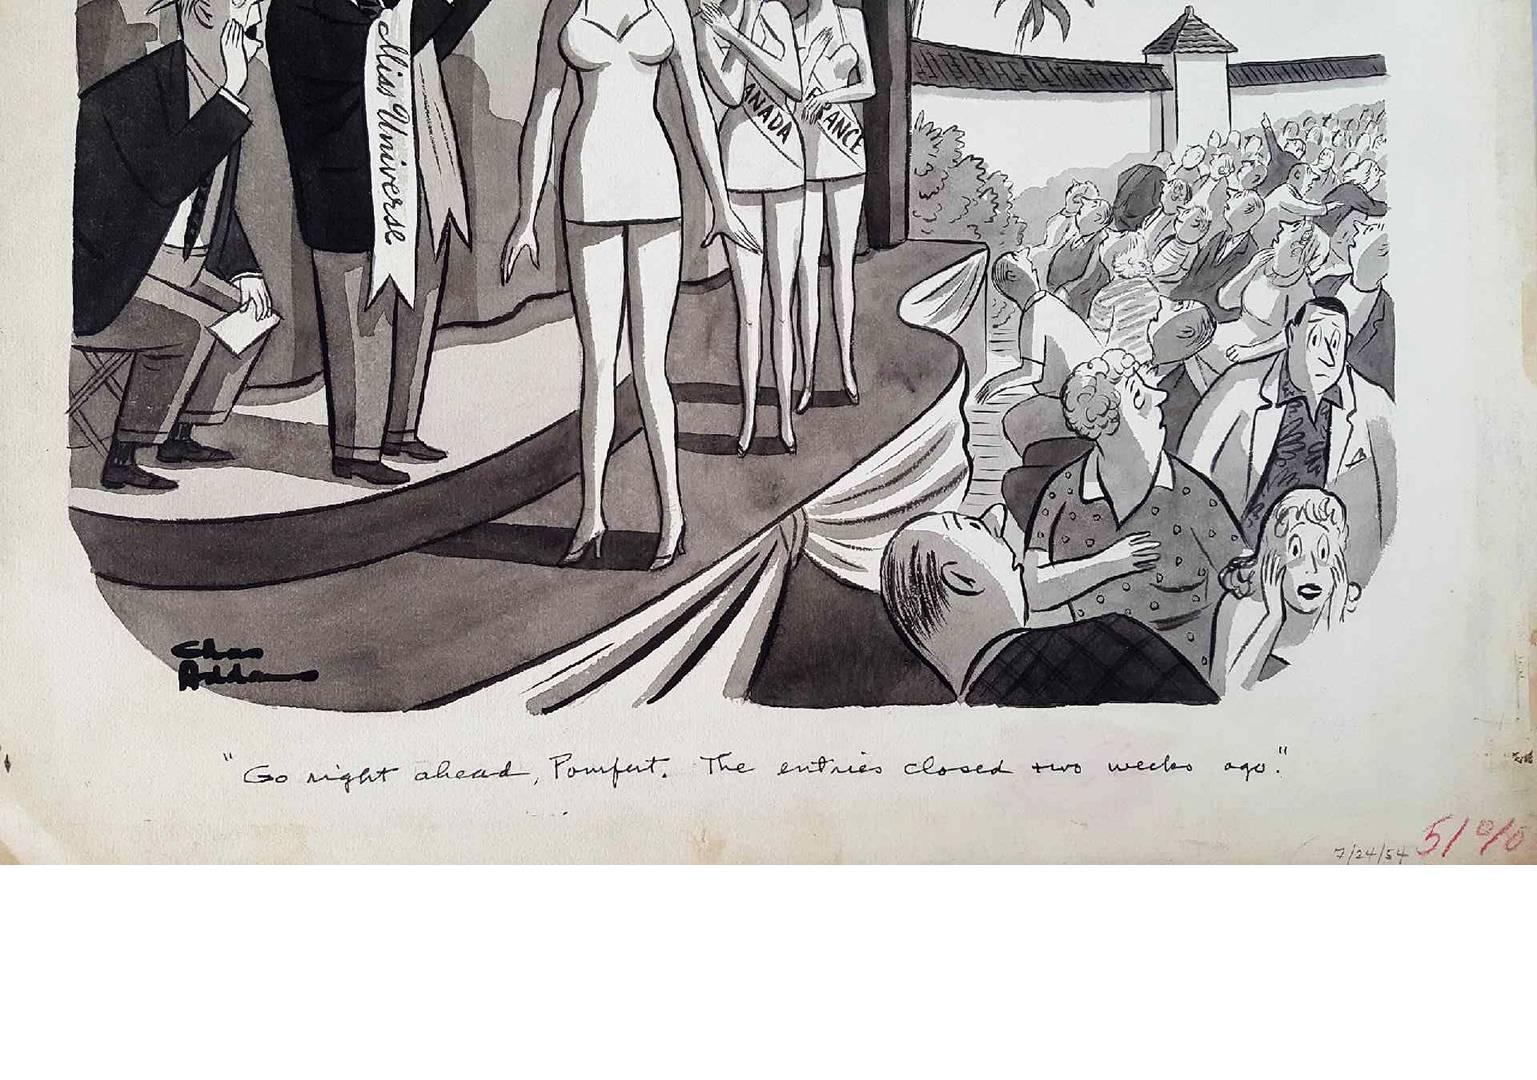 Miss Universe Pageant With Alien Spaceship - American Modern Painting by Charles Samuel Addams